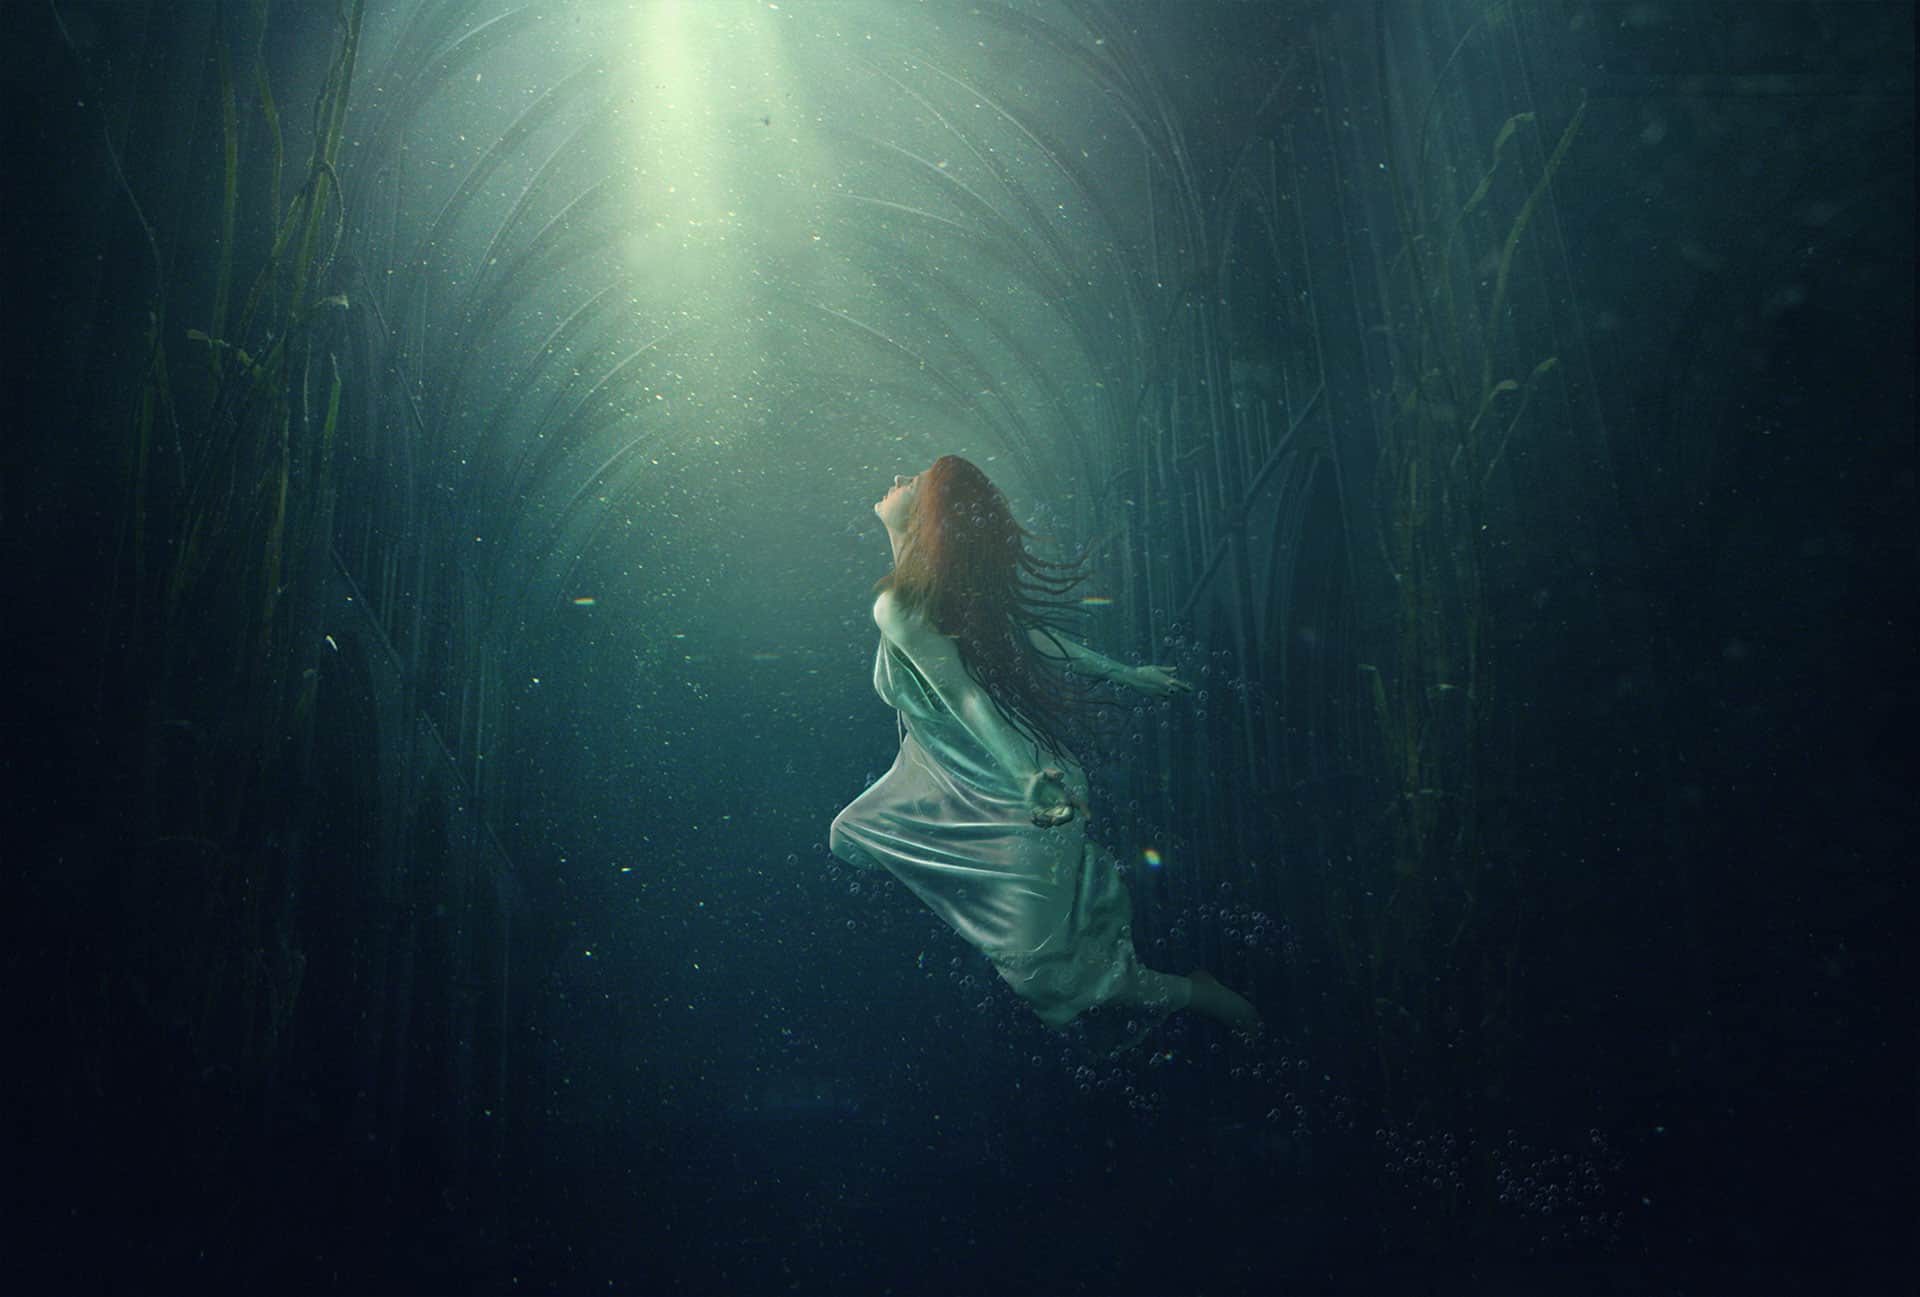 Create an Underwater Dreamscape in Photoshop